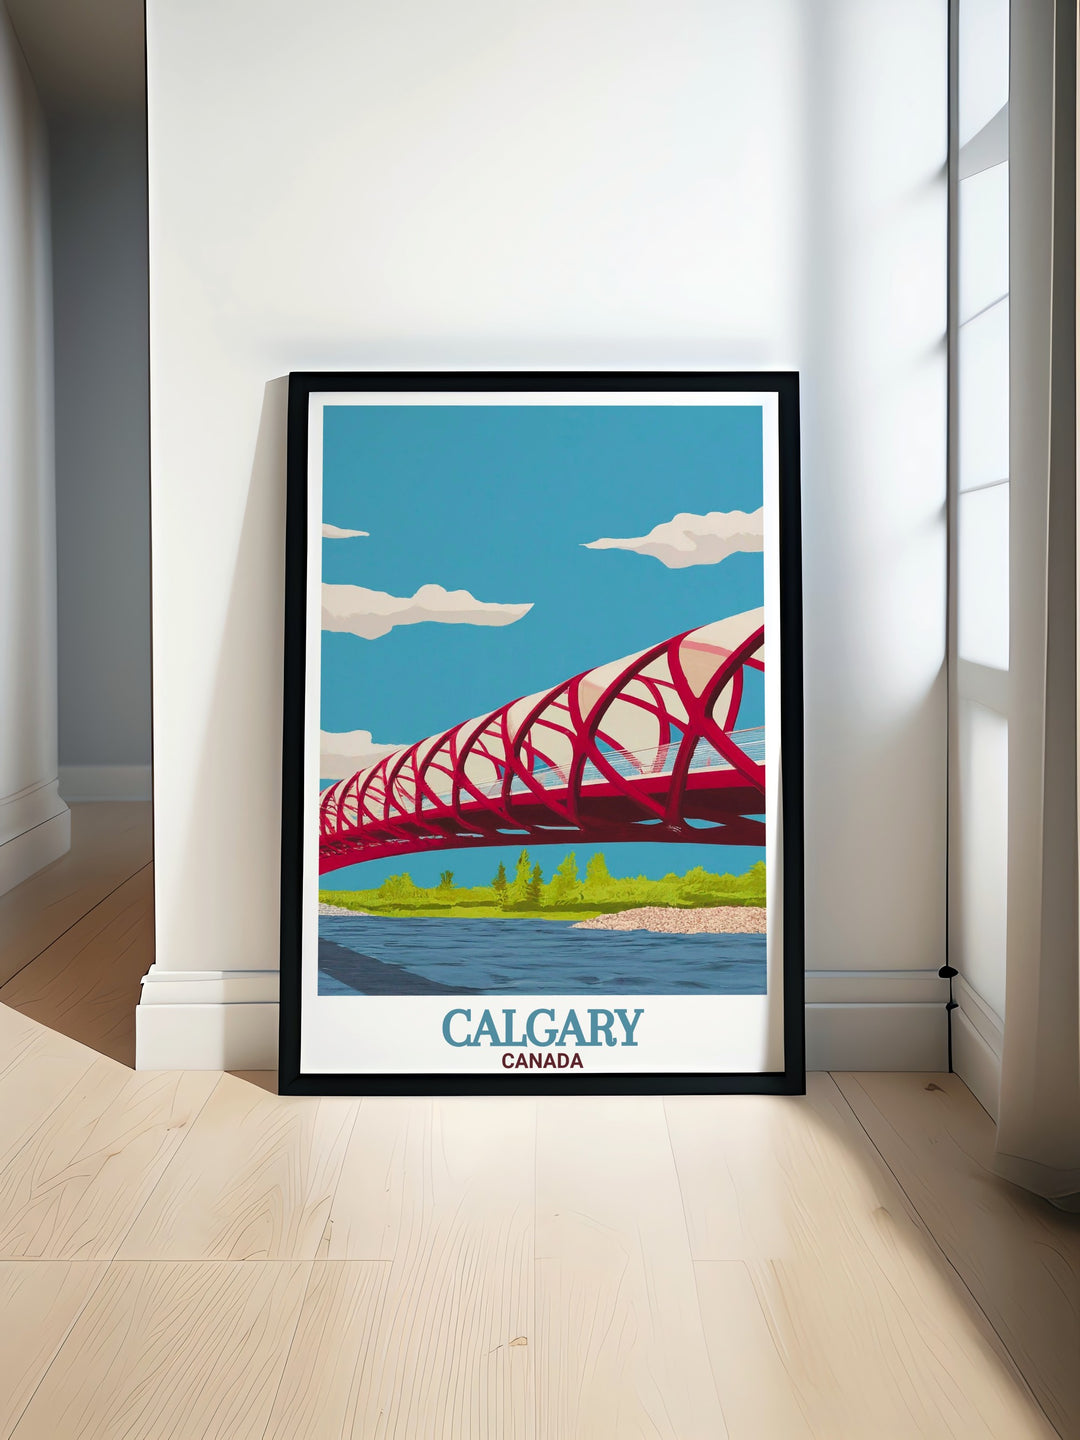 Discover the beauty of The Peace Bridge with this stunning travel poster showcasing Calgarys iconic landmark. Perfect for Canada wall art and decor this vibrant print brings urban elegance into your home or office space.